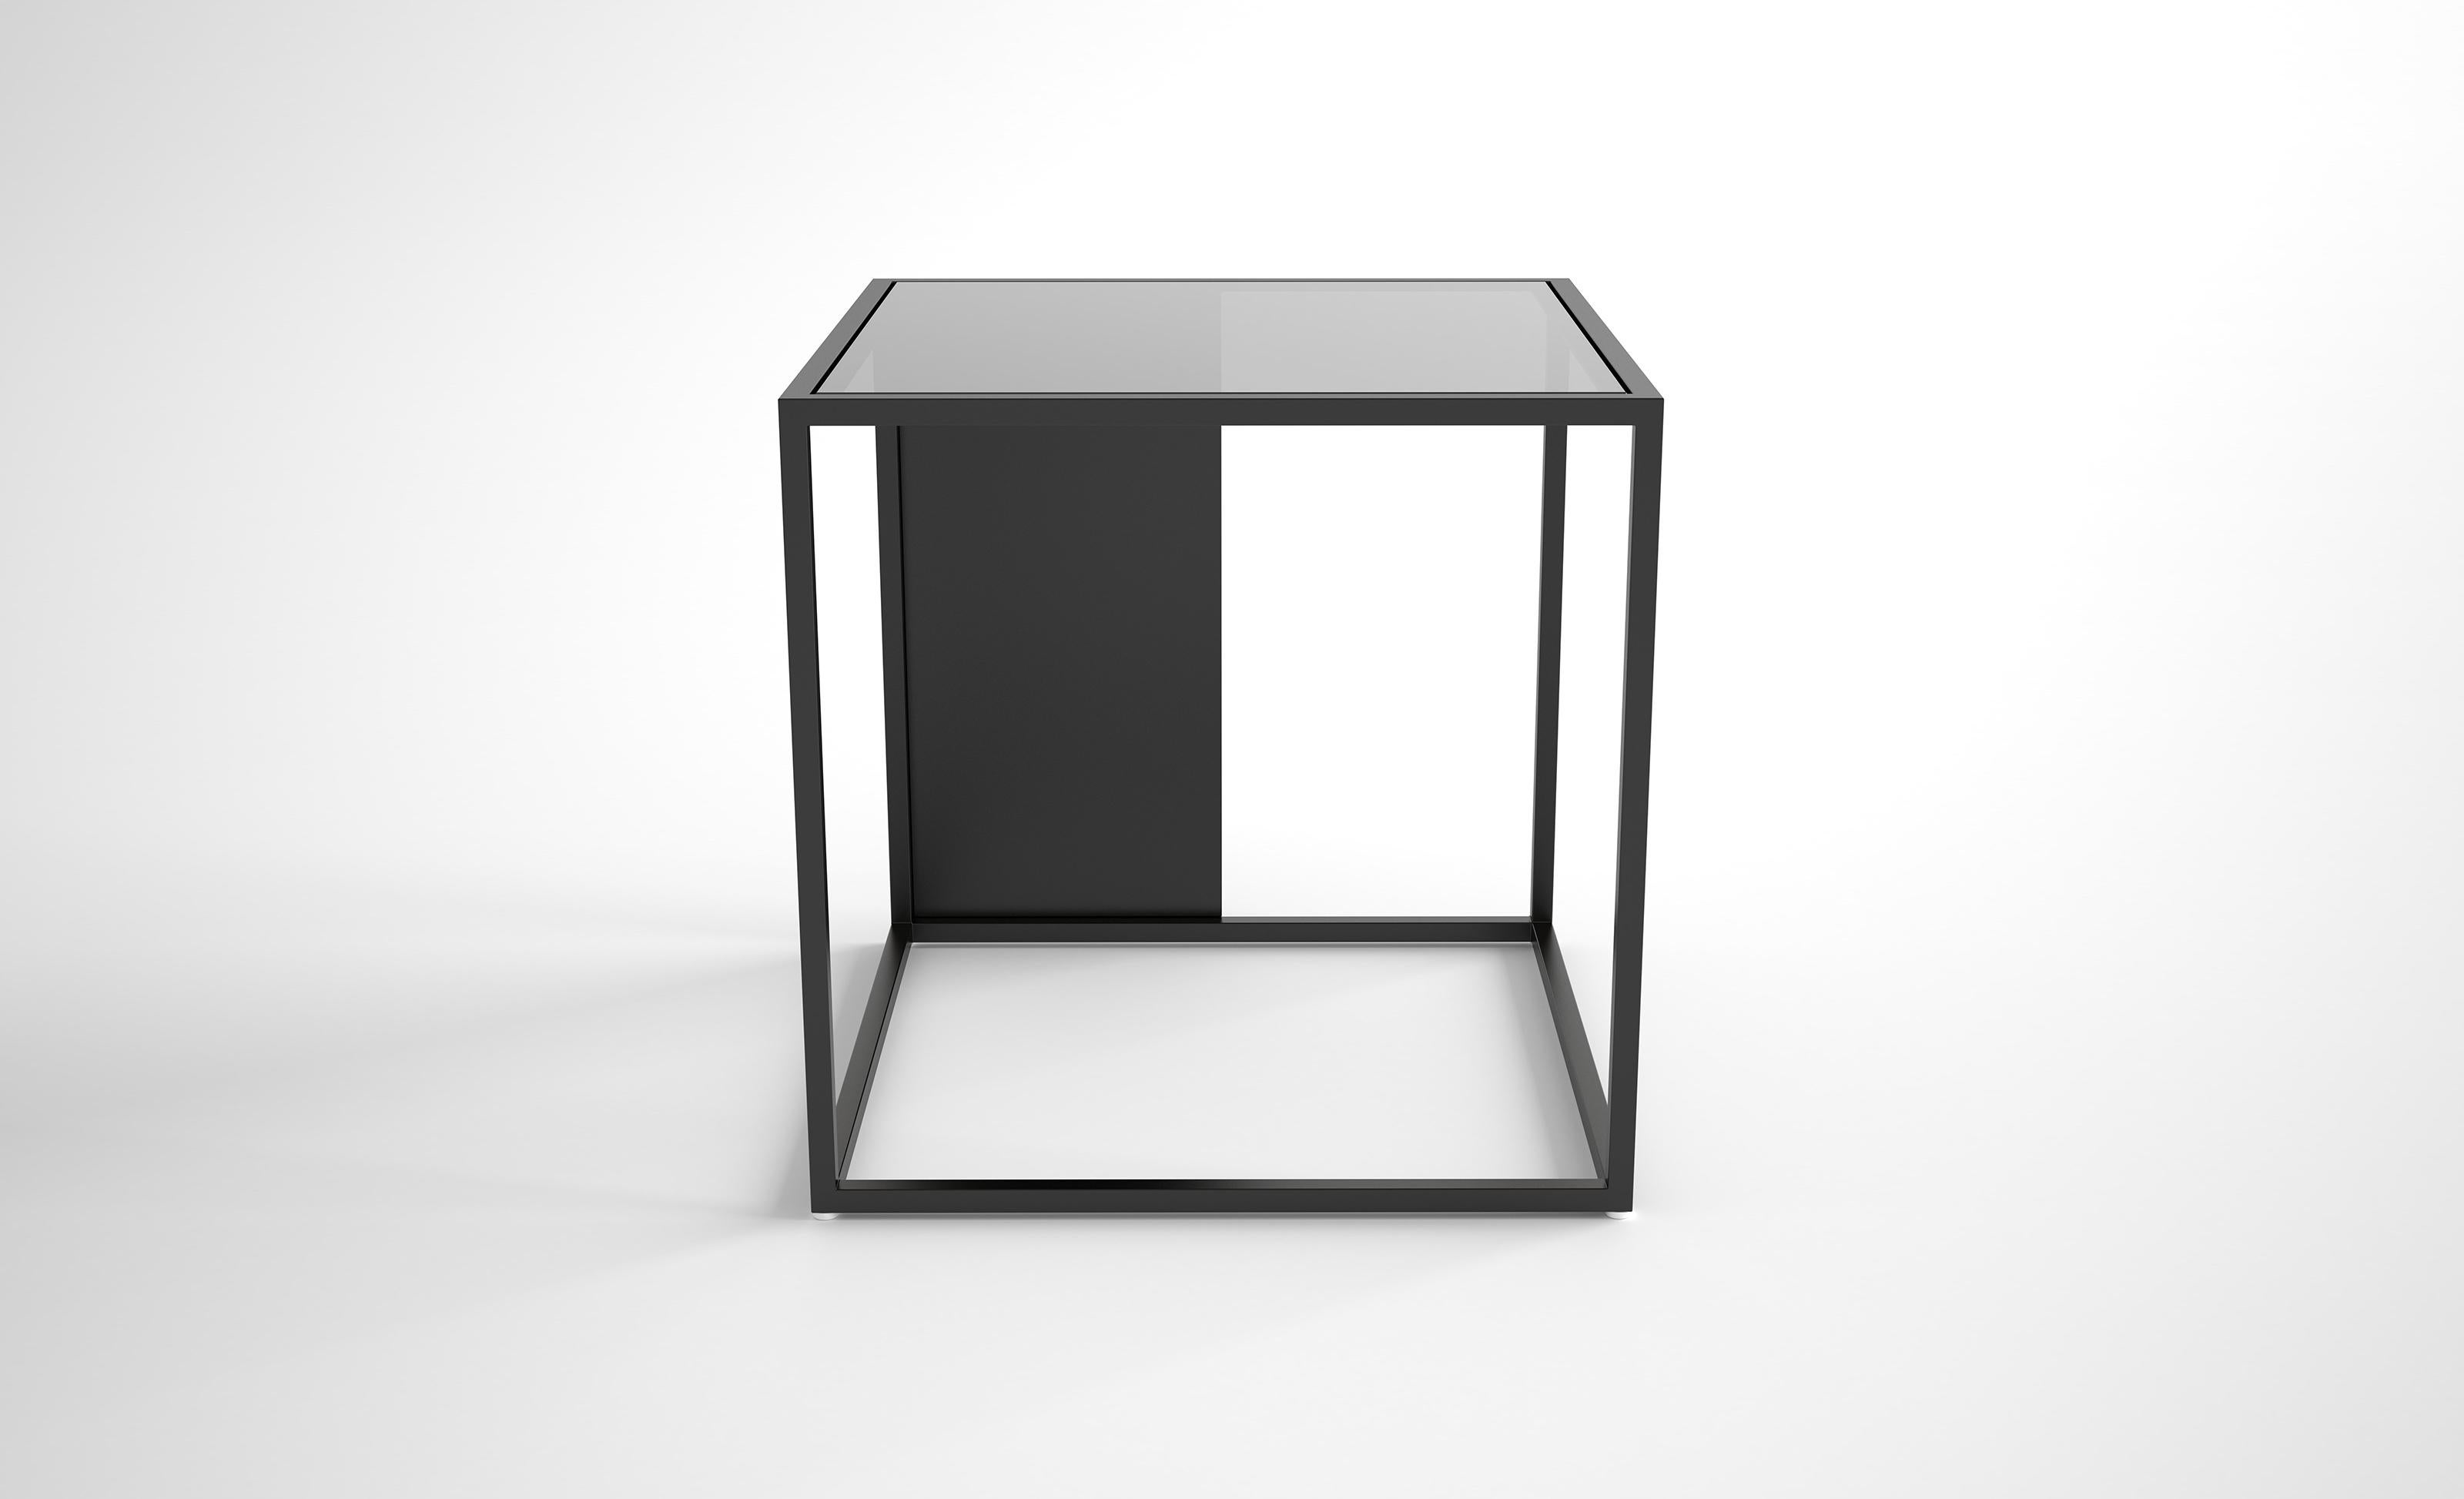 Half & Half Side Table by Phase Design
Dimensions: D 40.6 x W 40.6  x H 40.6 cm. 
Materials: Powder-coated metal and glass. 

Powder-coated square steel bar available with starphire or grey glass top. Powder coat finishes are available in flat black